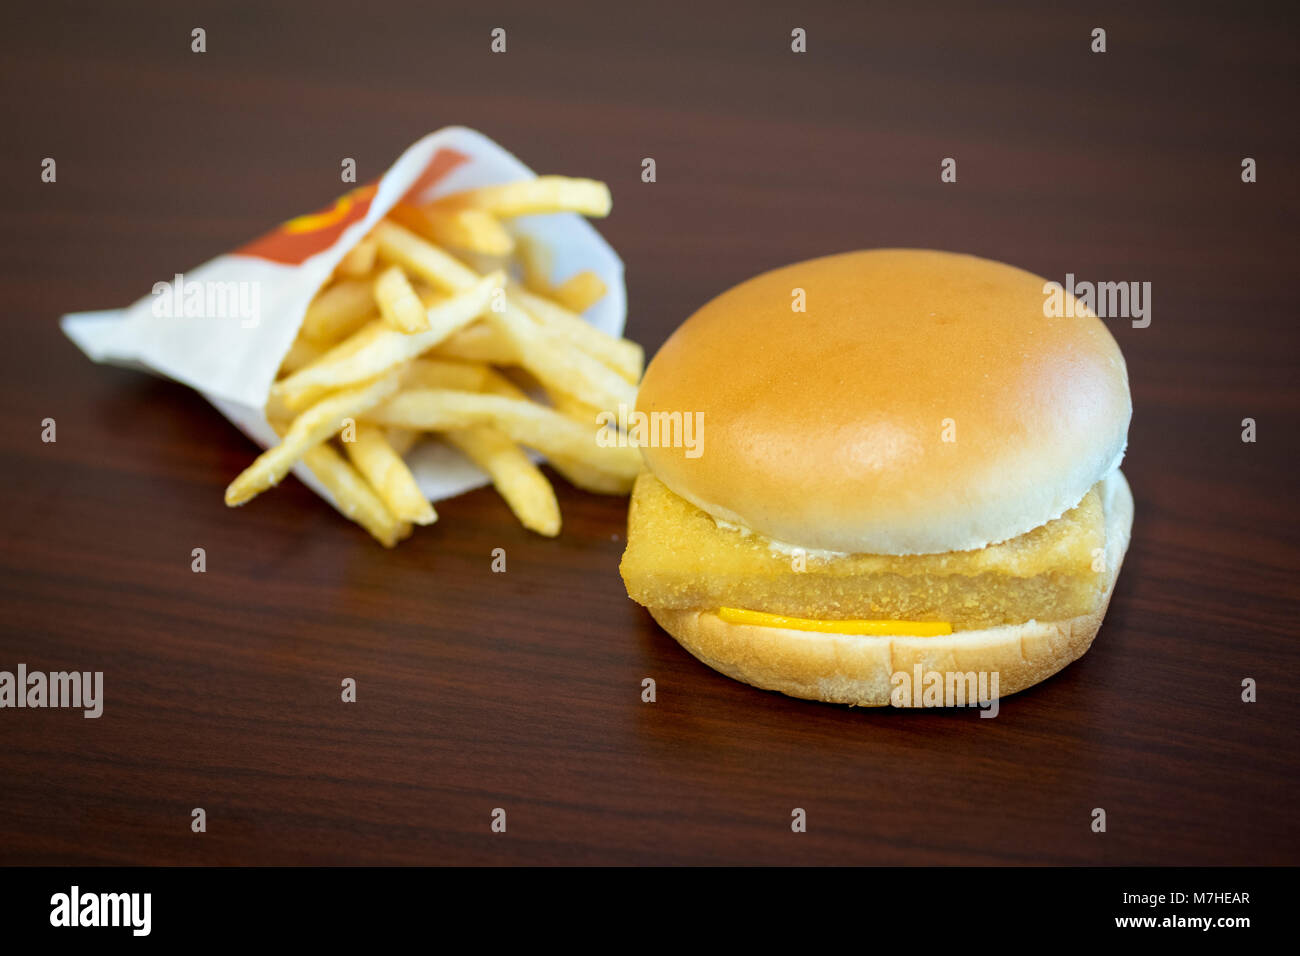 A McDonald's Filet-O-Fish, a fish sandwich, and a small french fries. Stock Photo